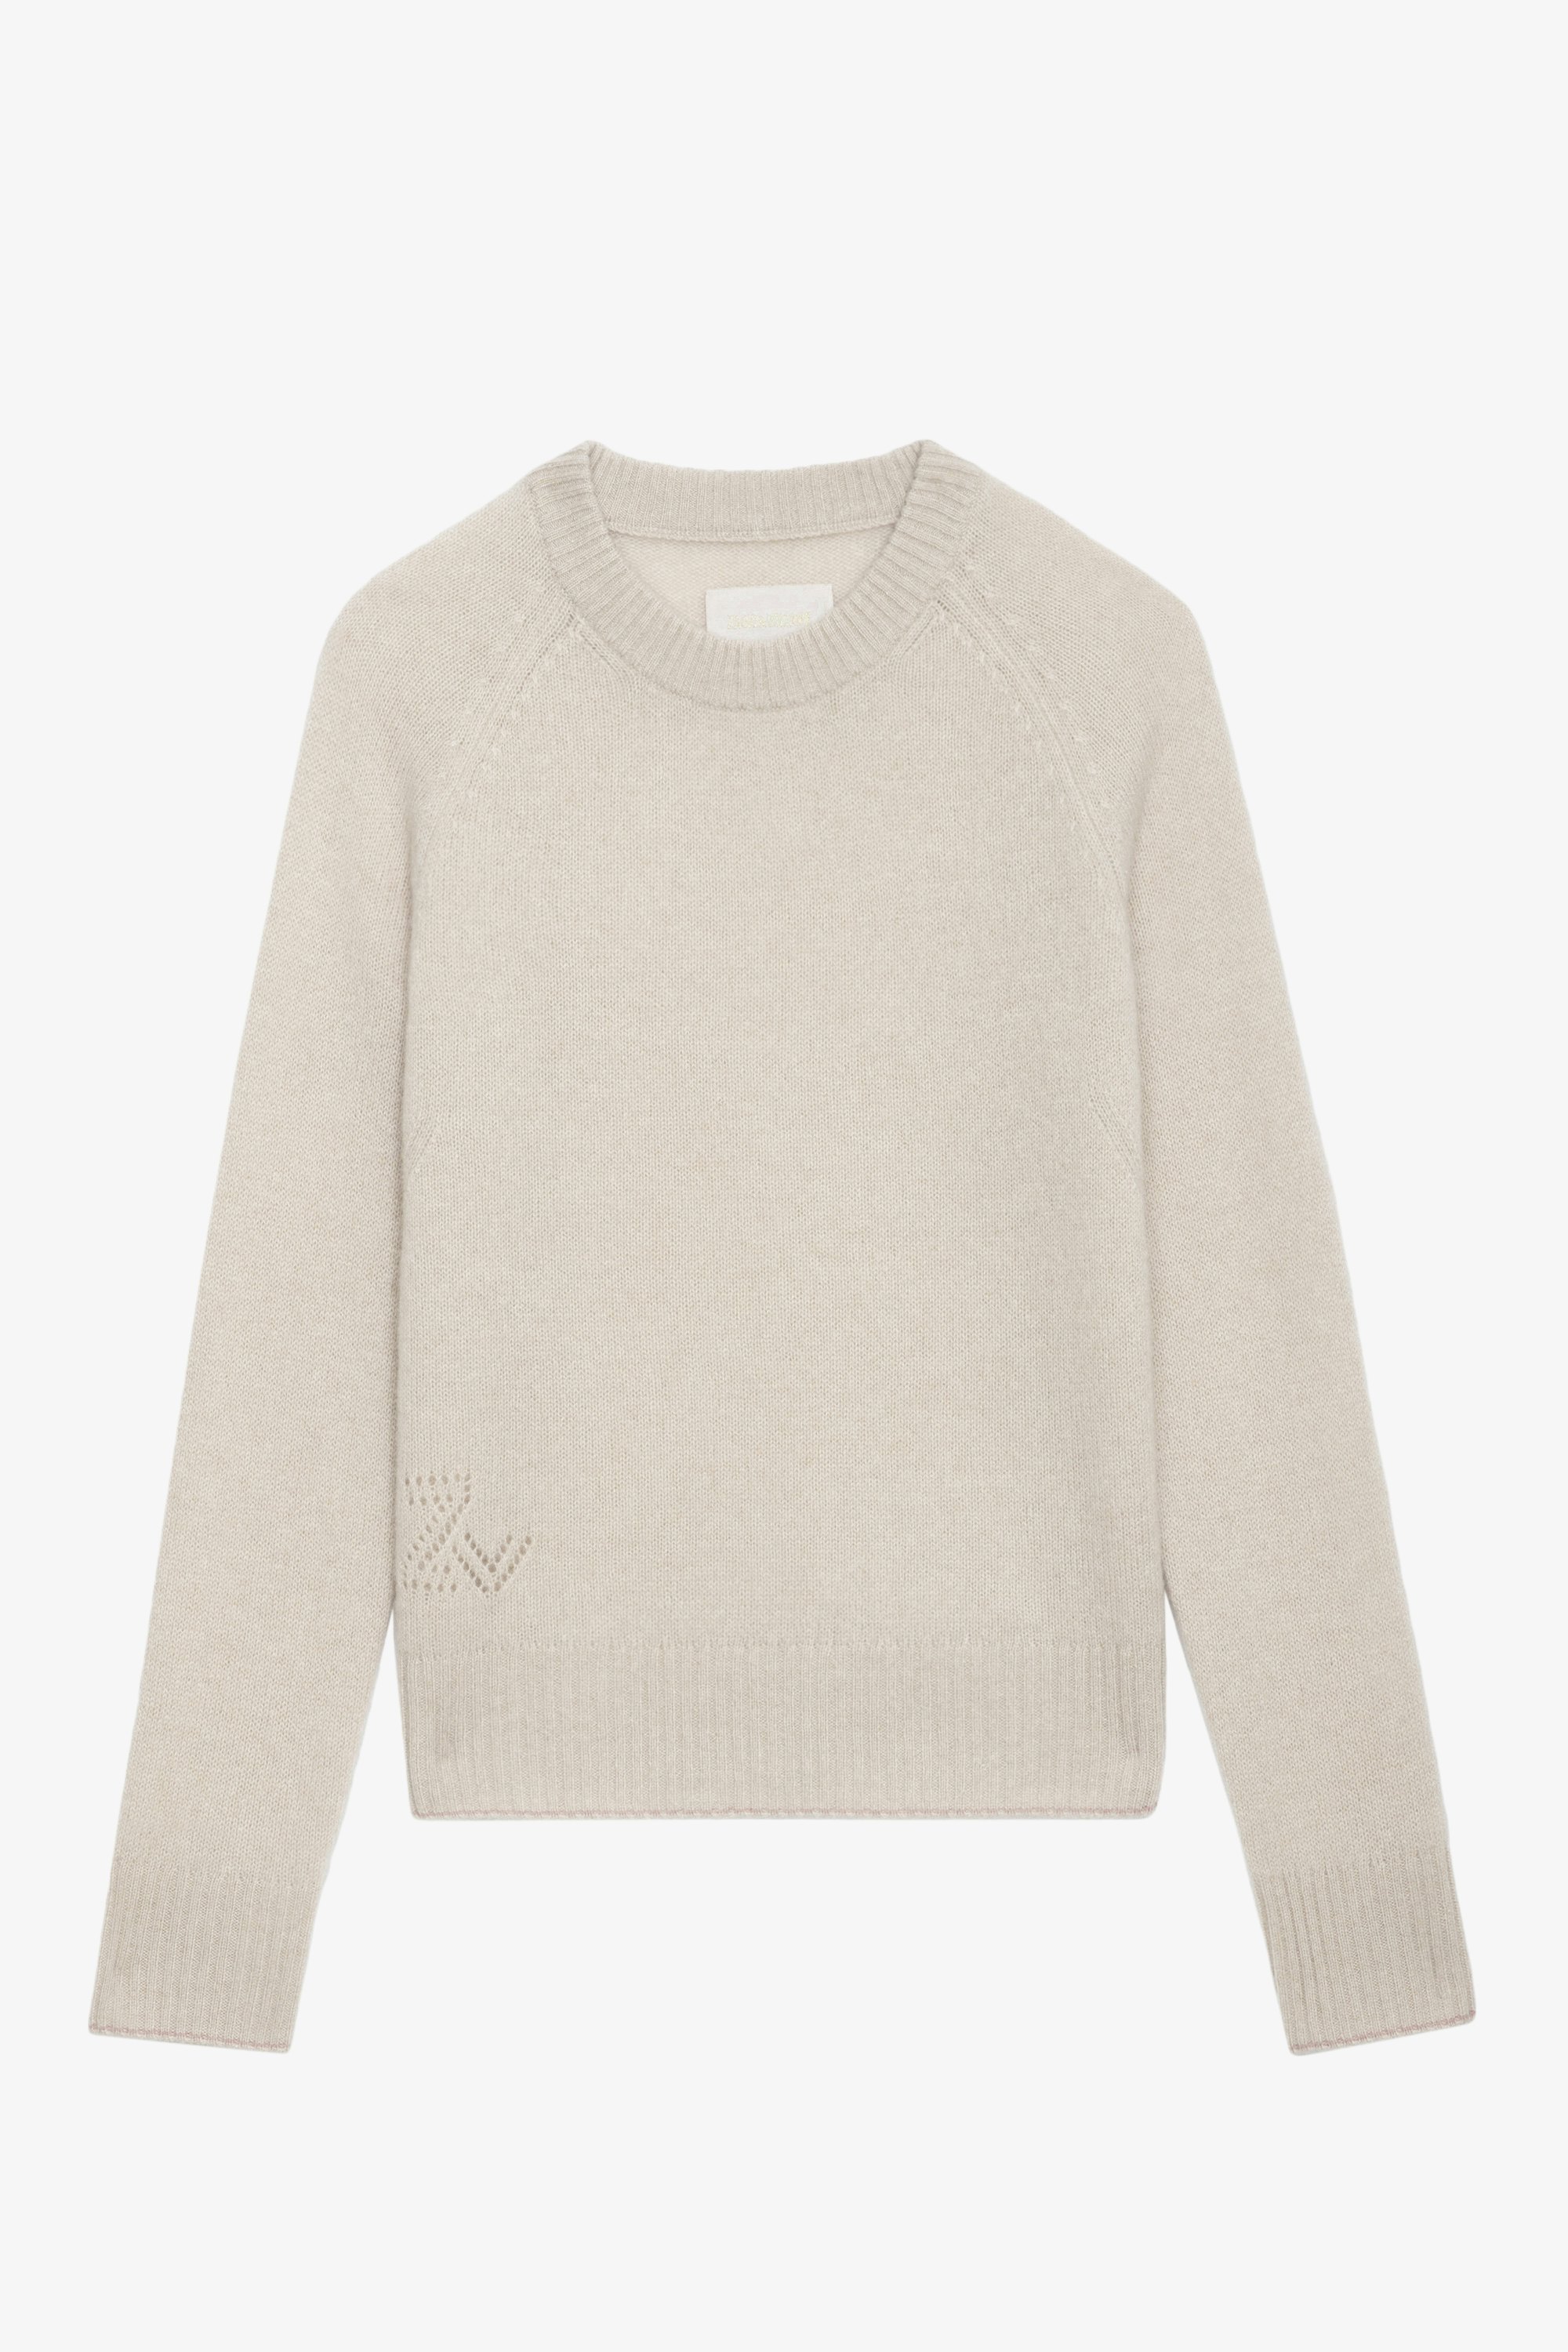 Sourcy Cashmere Jumper - Beige cashmere jumper with round neckline and long sleeves.